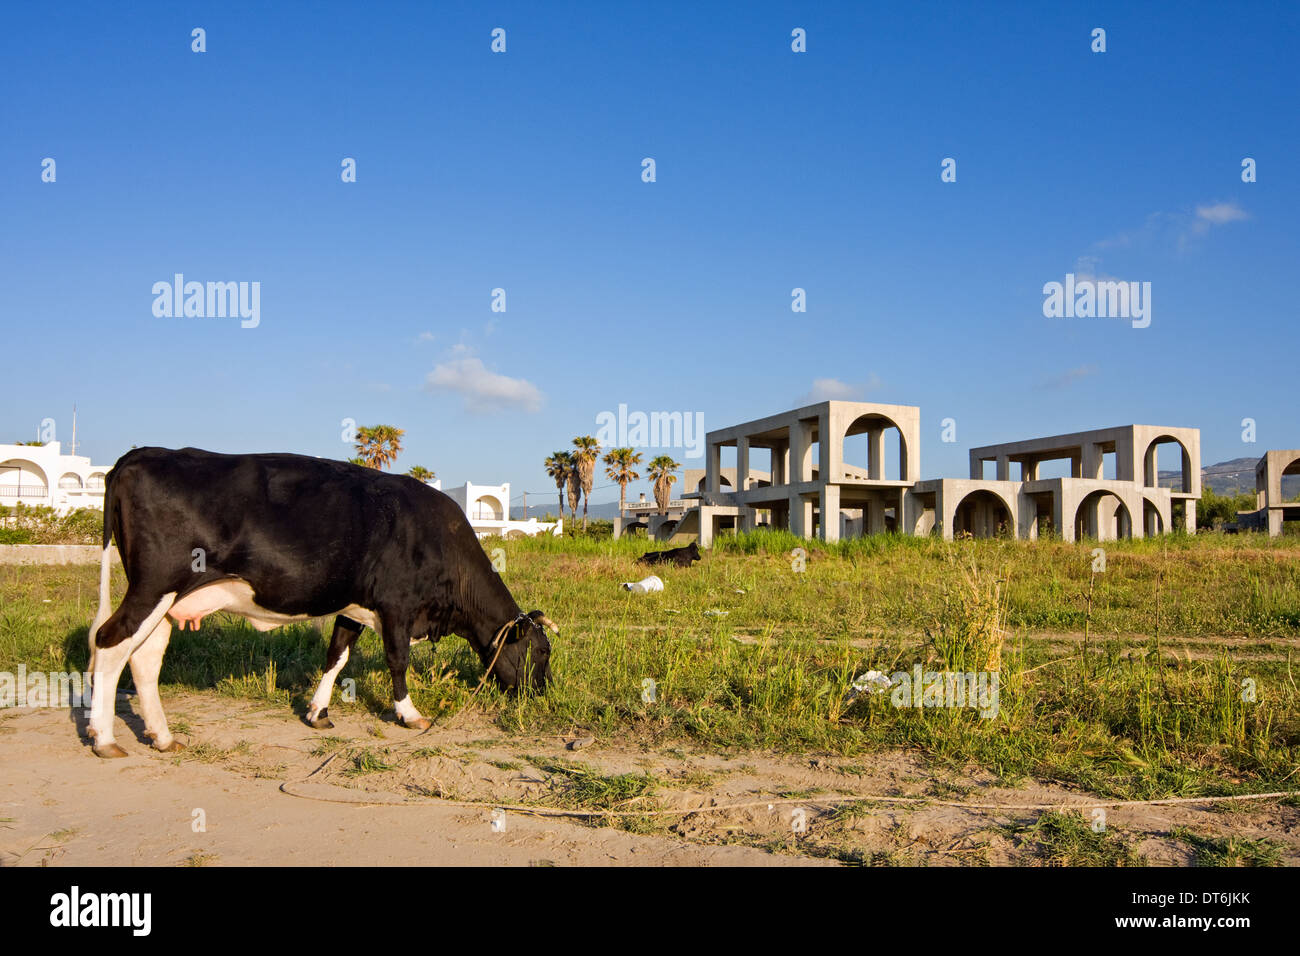 Stagnating construction of holiday park in Greece: a cow grazing amidst casco's Stock Photo